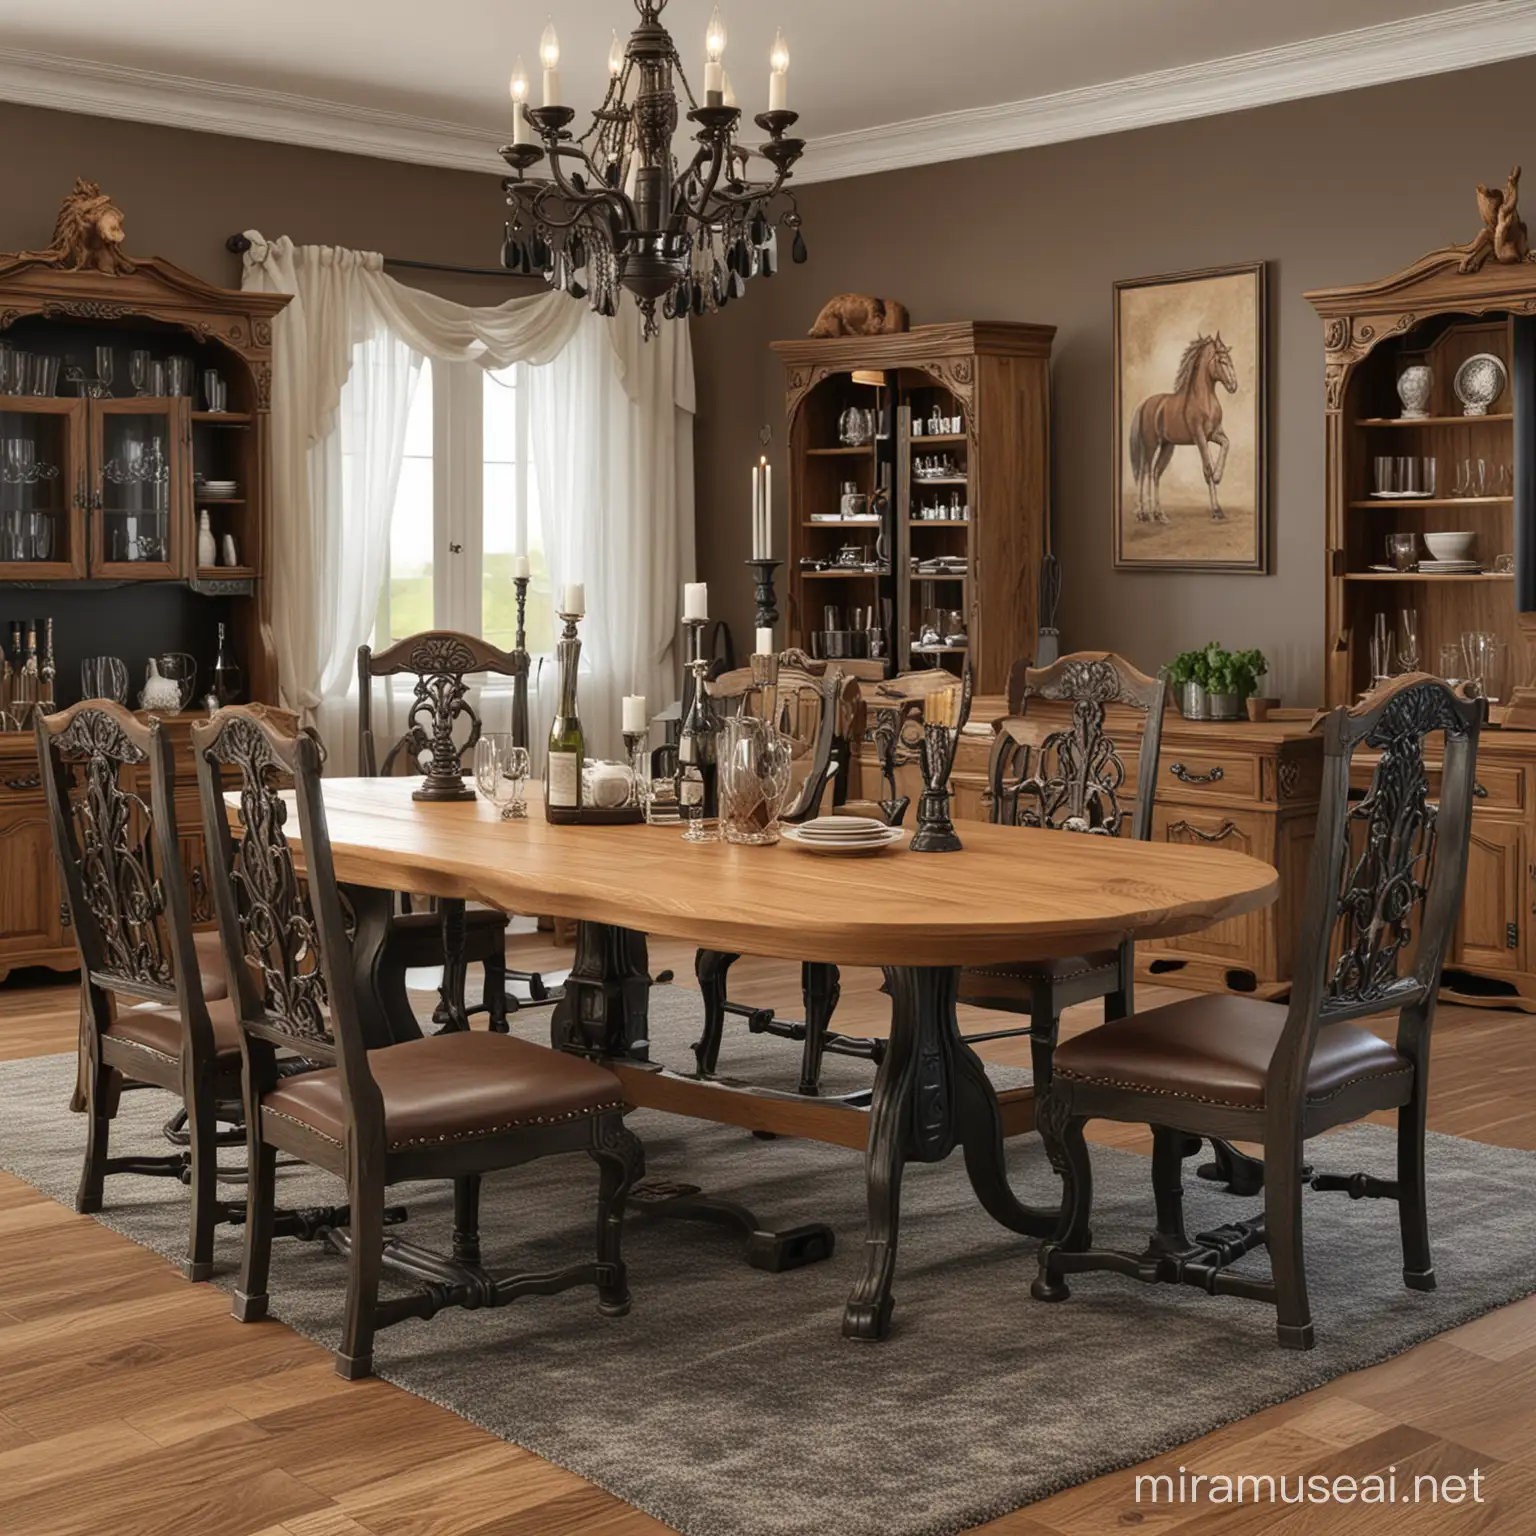 horse lovers design. horse accessories. horse shape dinner table. horse saddle rack instead of chairs. oak wood. fancy. black hardware.  very detailed.  realistic architecture. good quality.  a horse eating dinner.